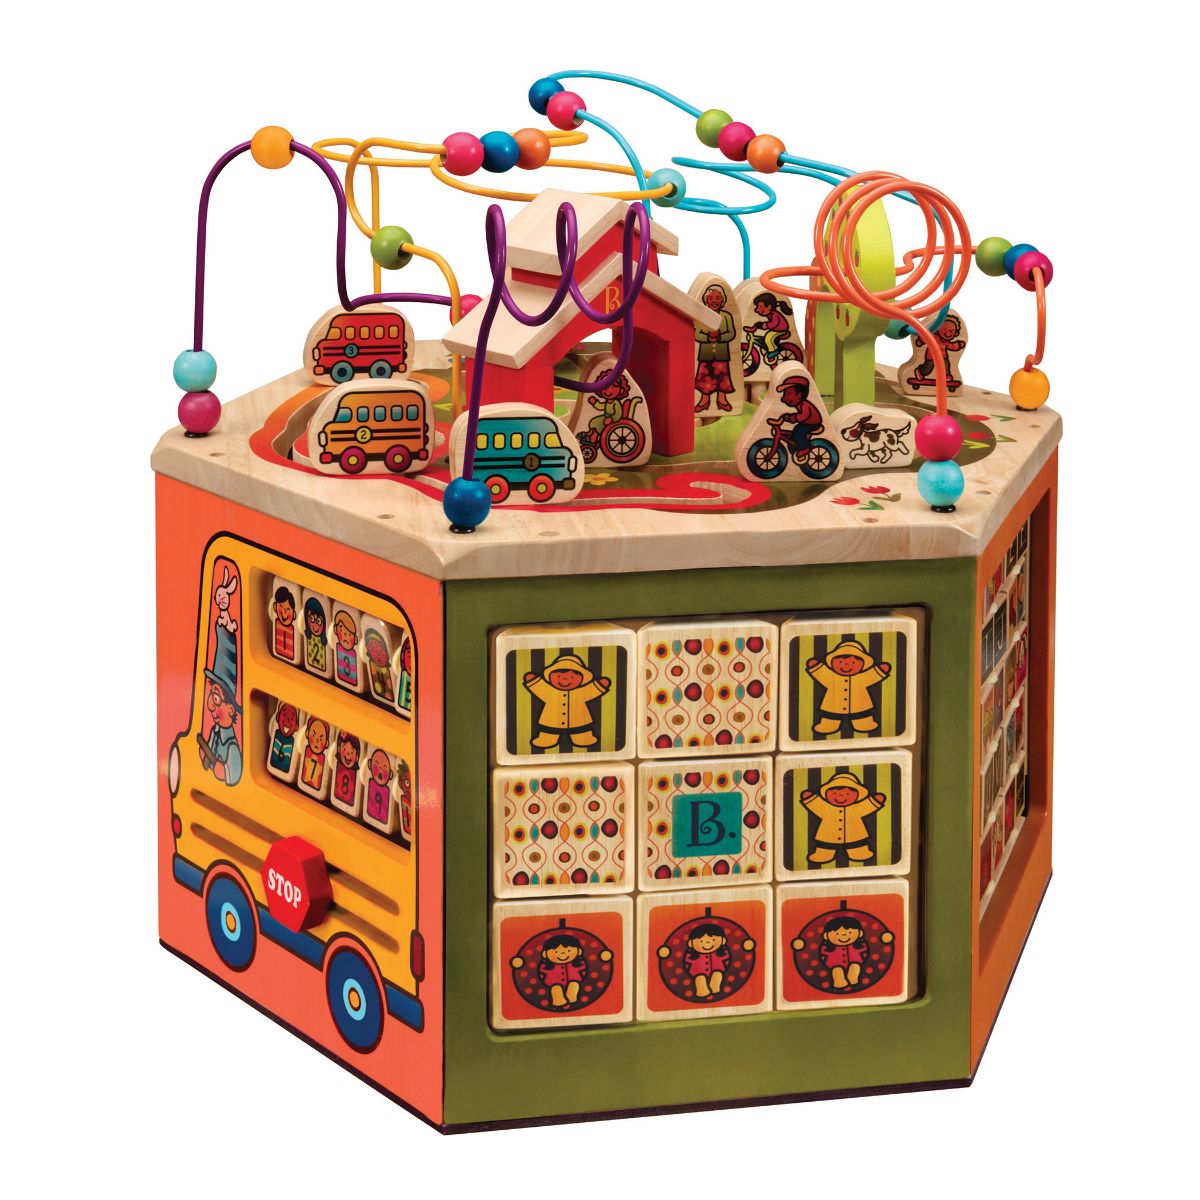 Youniversity-Wooden Activity Cube-B. Woodsy